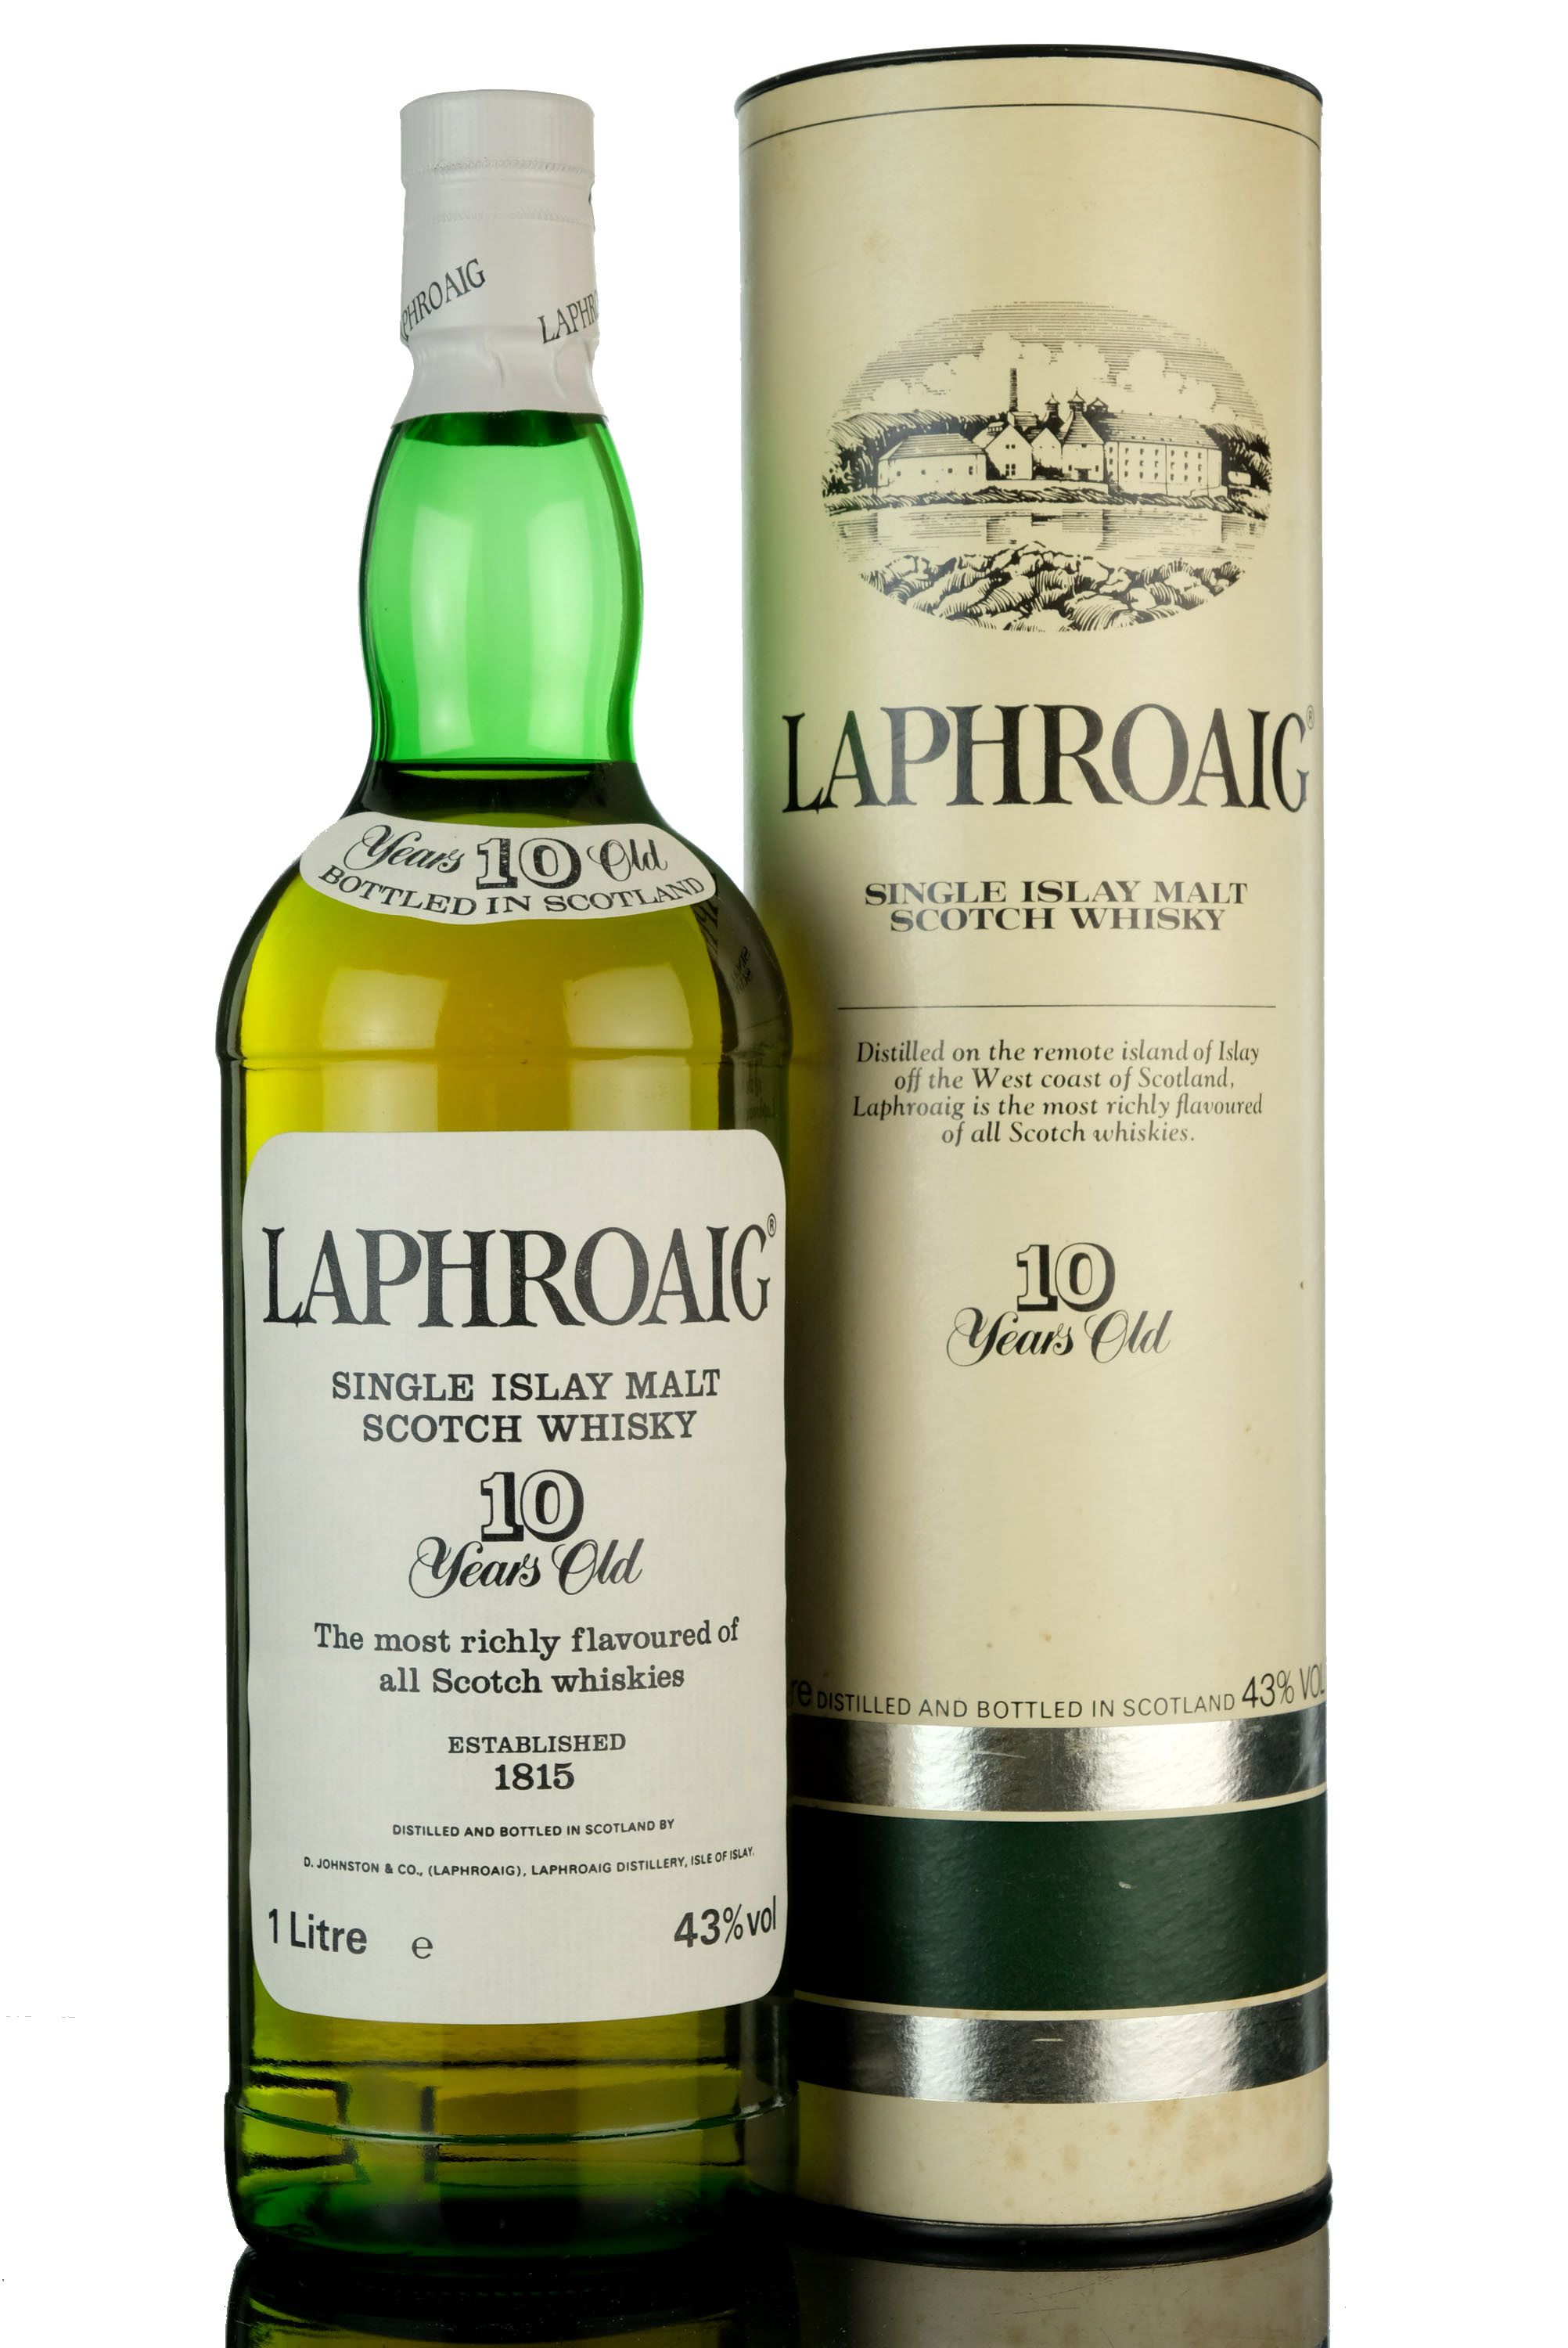 Laphroaig 10 Year Old - Early 1990s - 1 Litre